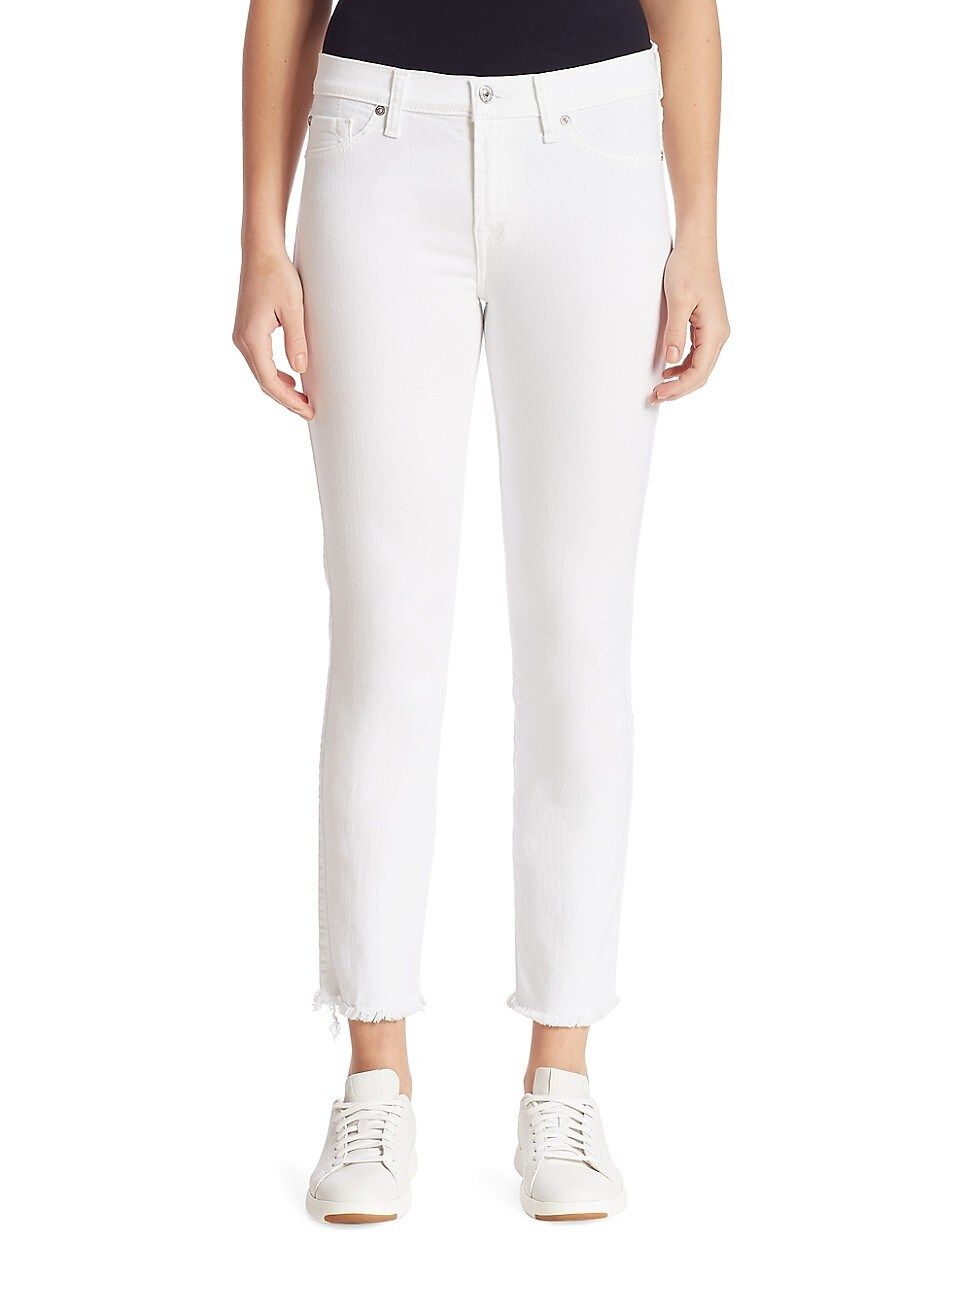 7 For All Mankind Women's Roxanne Mid-Rise Frayed Cigarette Jeans - White Fashion - Size Denim: 27 | Saks Fifth Avenue